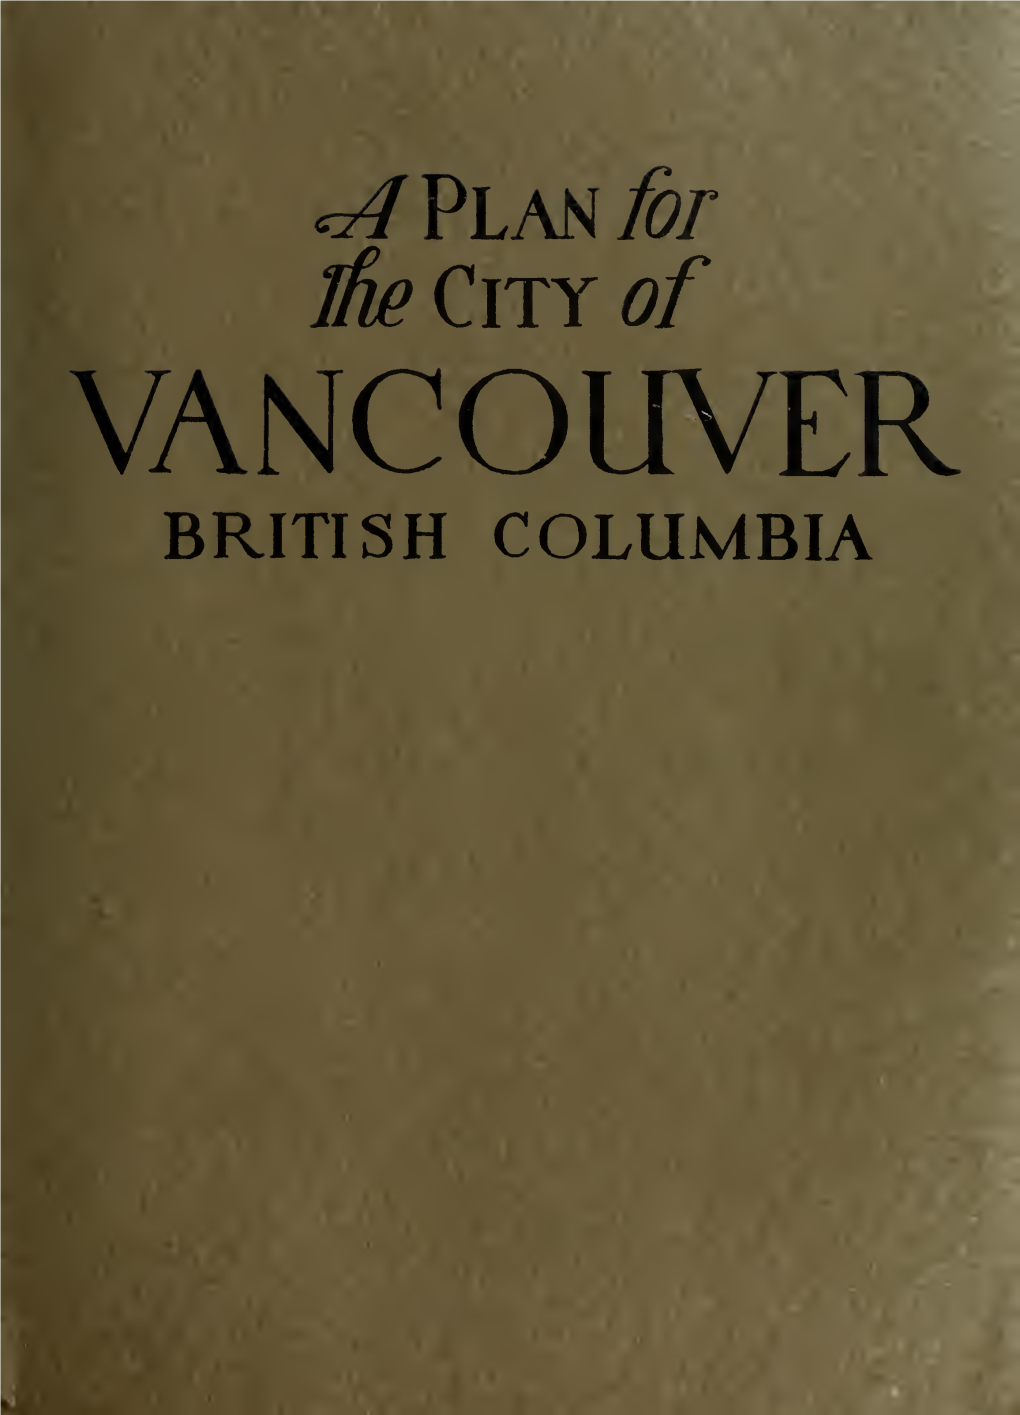 A Plan for the City of Vancouver, British Columbia," There Are A